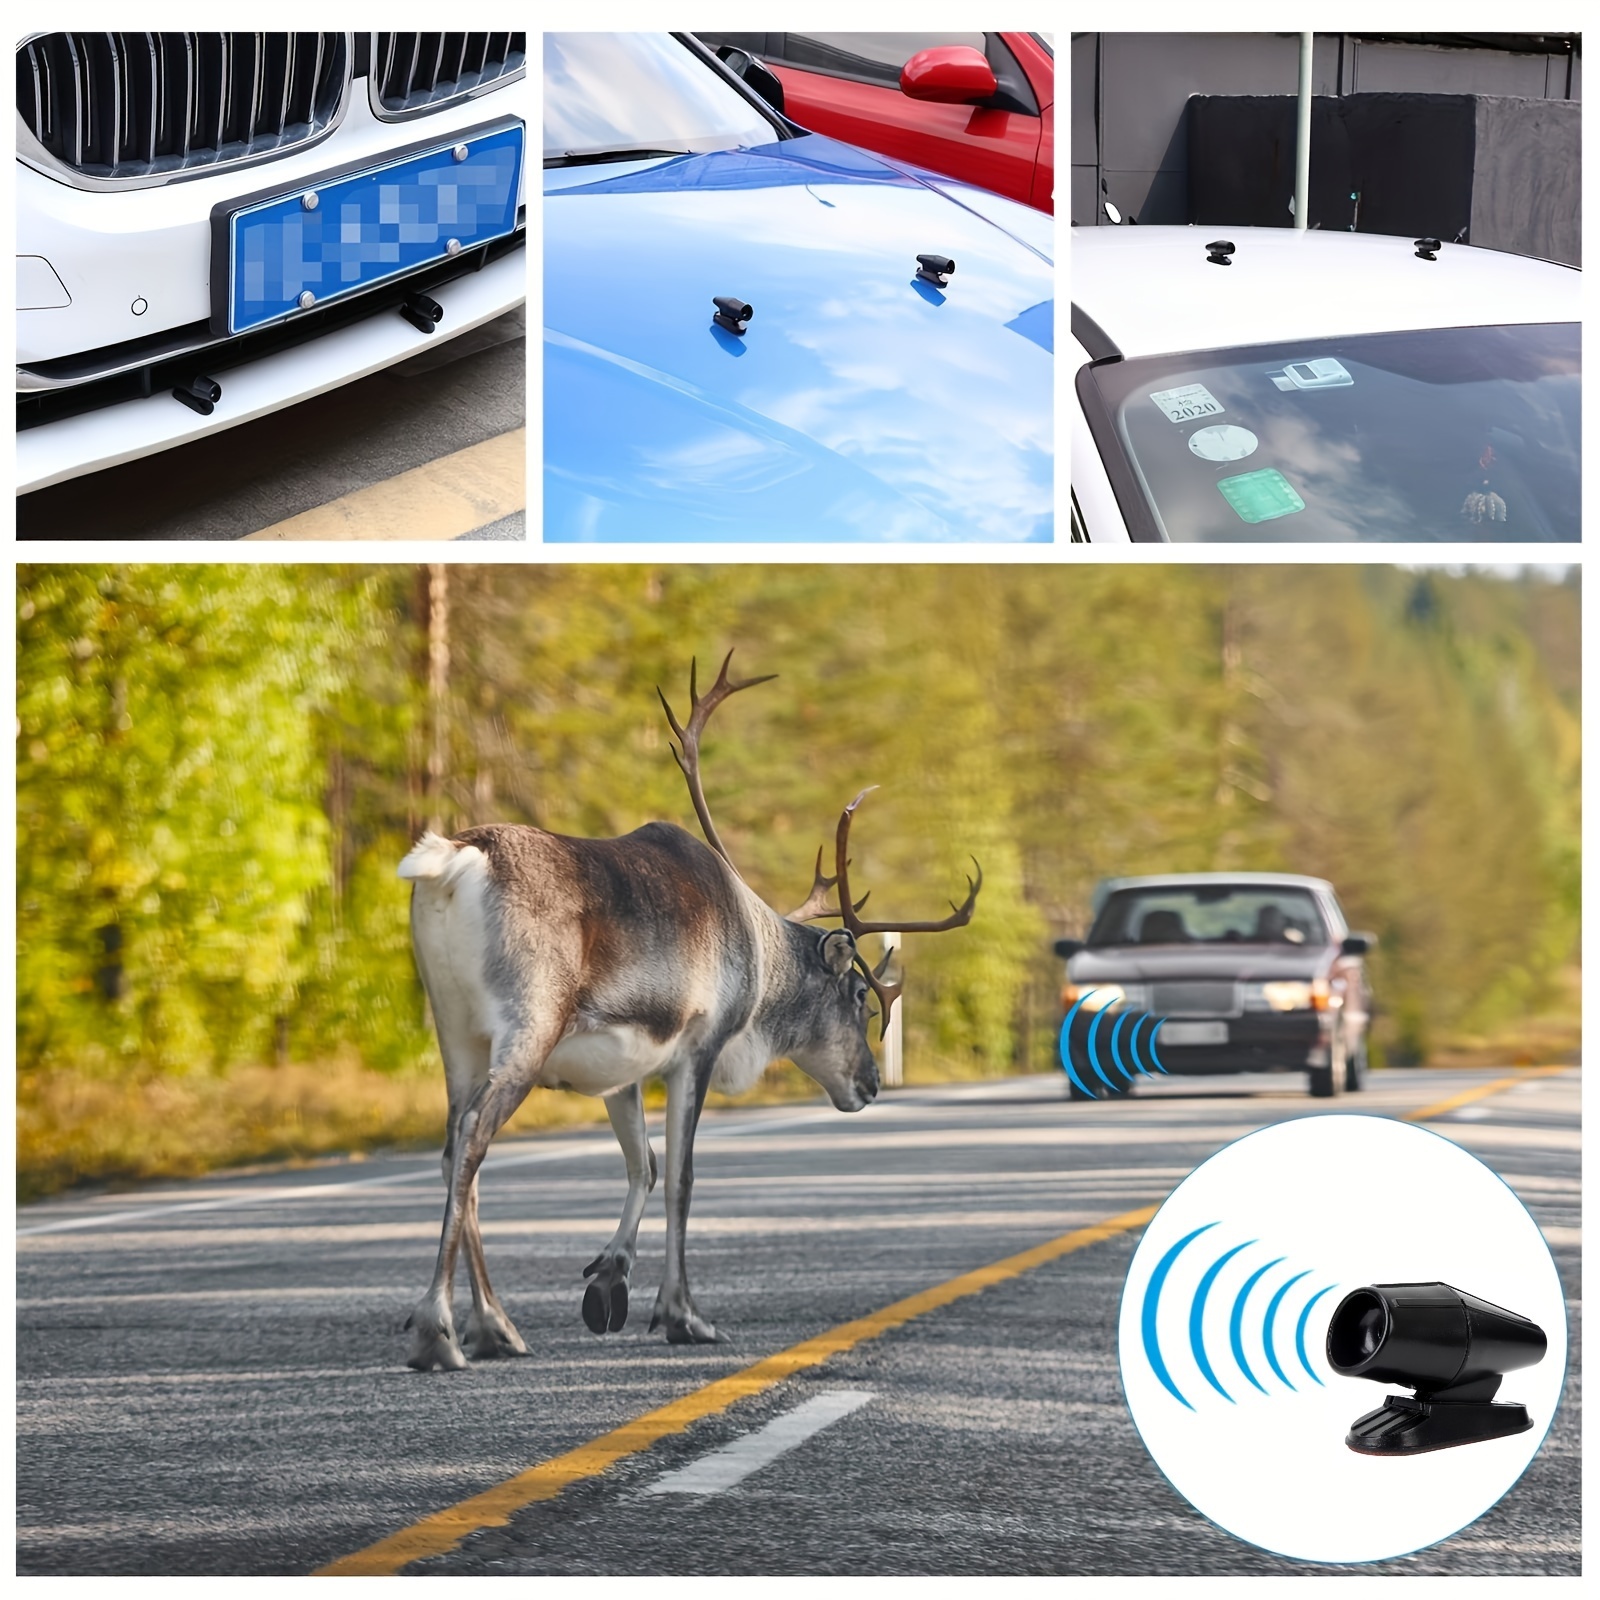 2 Deer Whistles Wildlife Warning Devices Animal Alert Car Safety  Accessories New